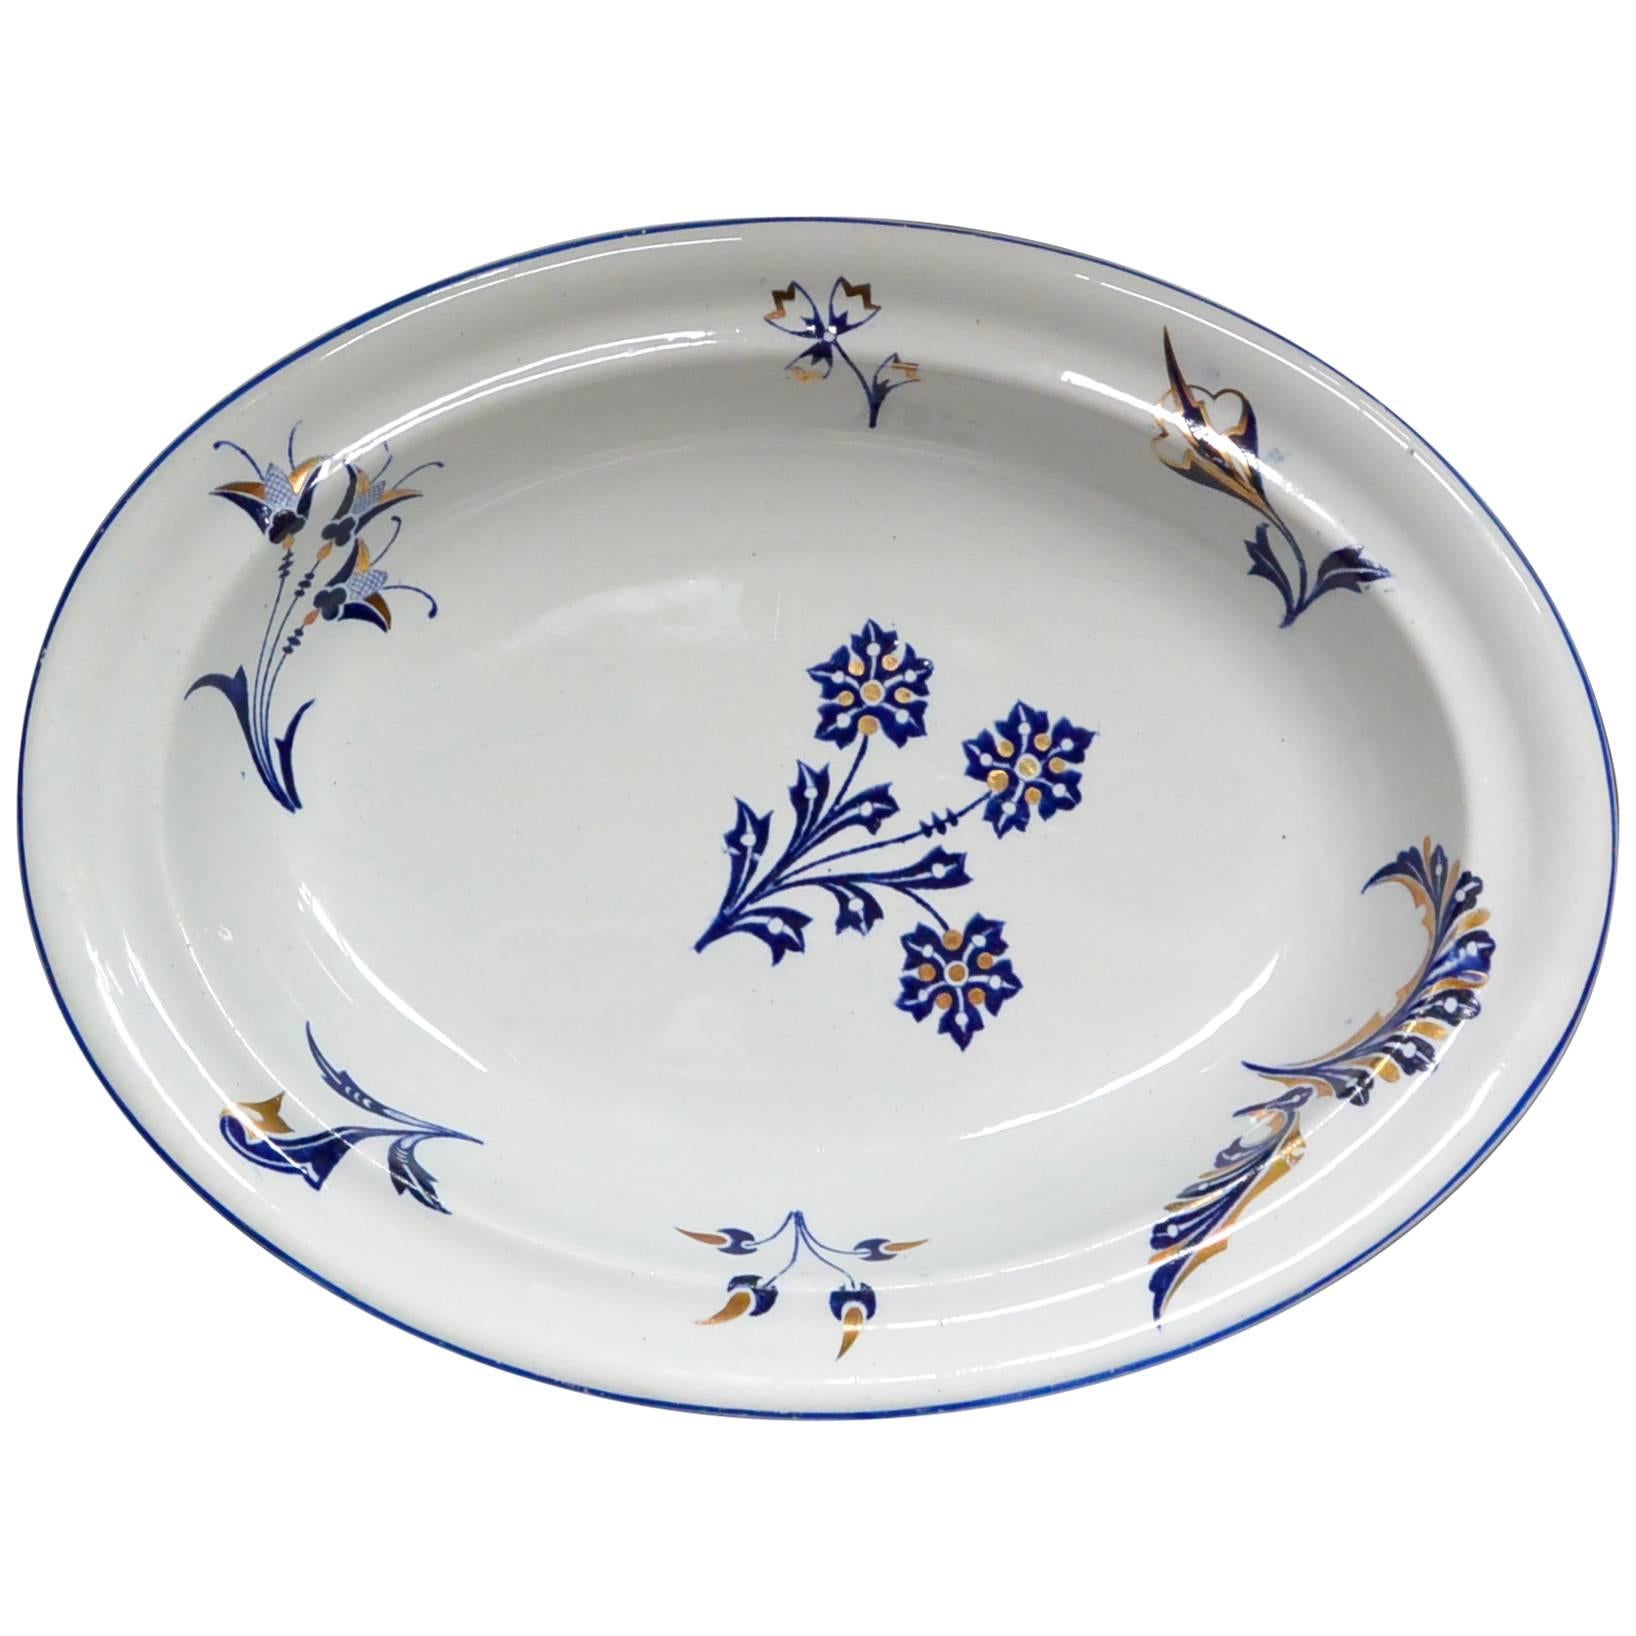 Wedgwood Blue, White and Gilt Floral Footed Dish